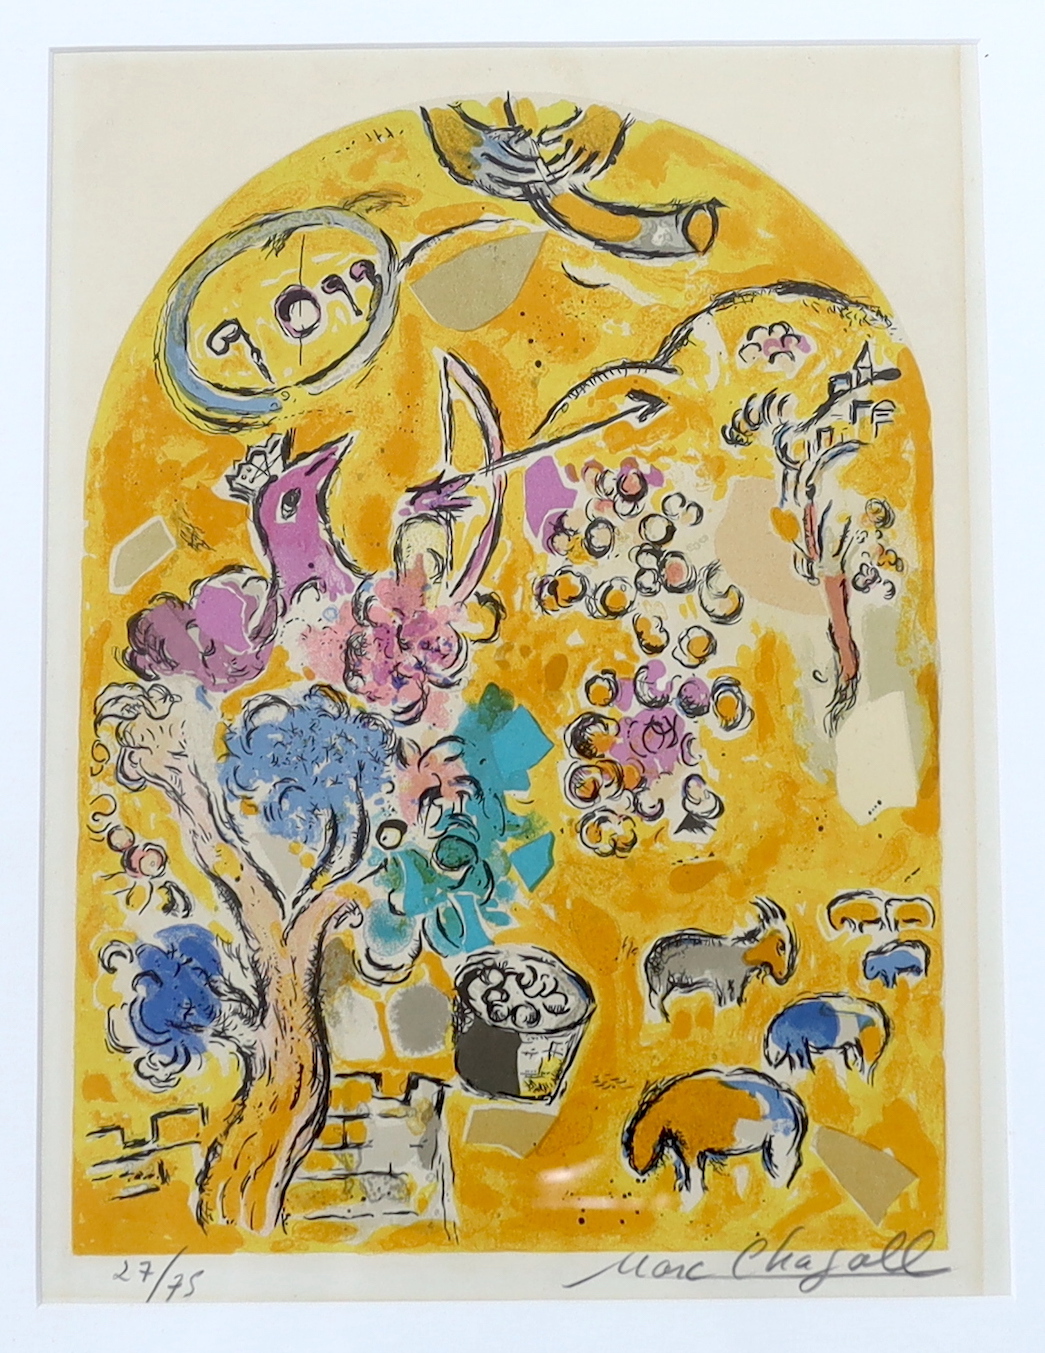 Marc Chagall (Russian/French, 1887-1985), colour lithograph, 'The Tribe for Joseph', signed in pencil, limited edition, 27/75, 31.5 x 23.5cm